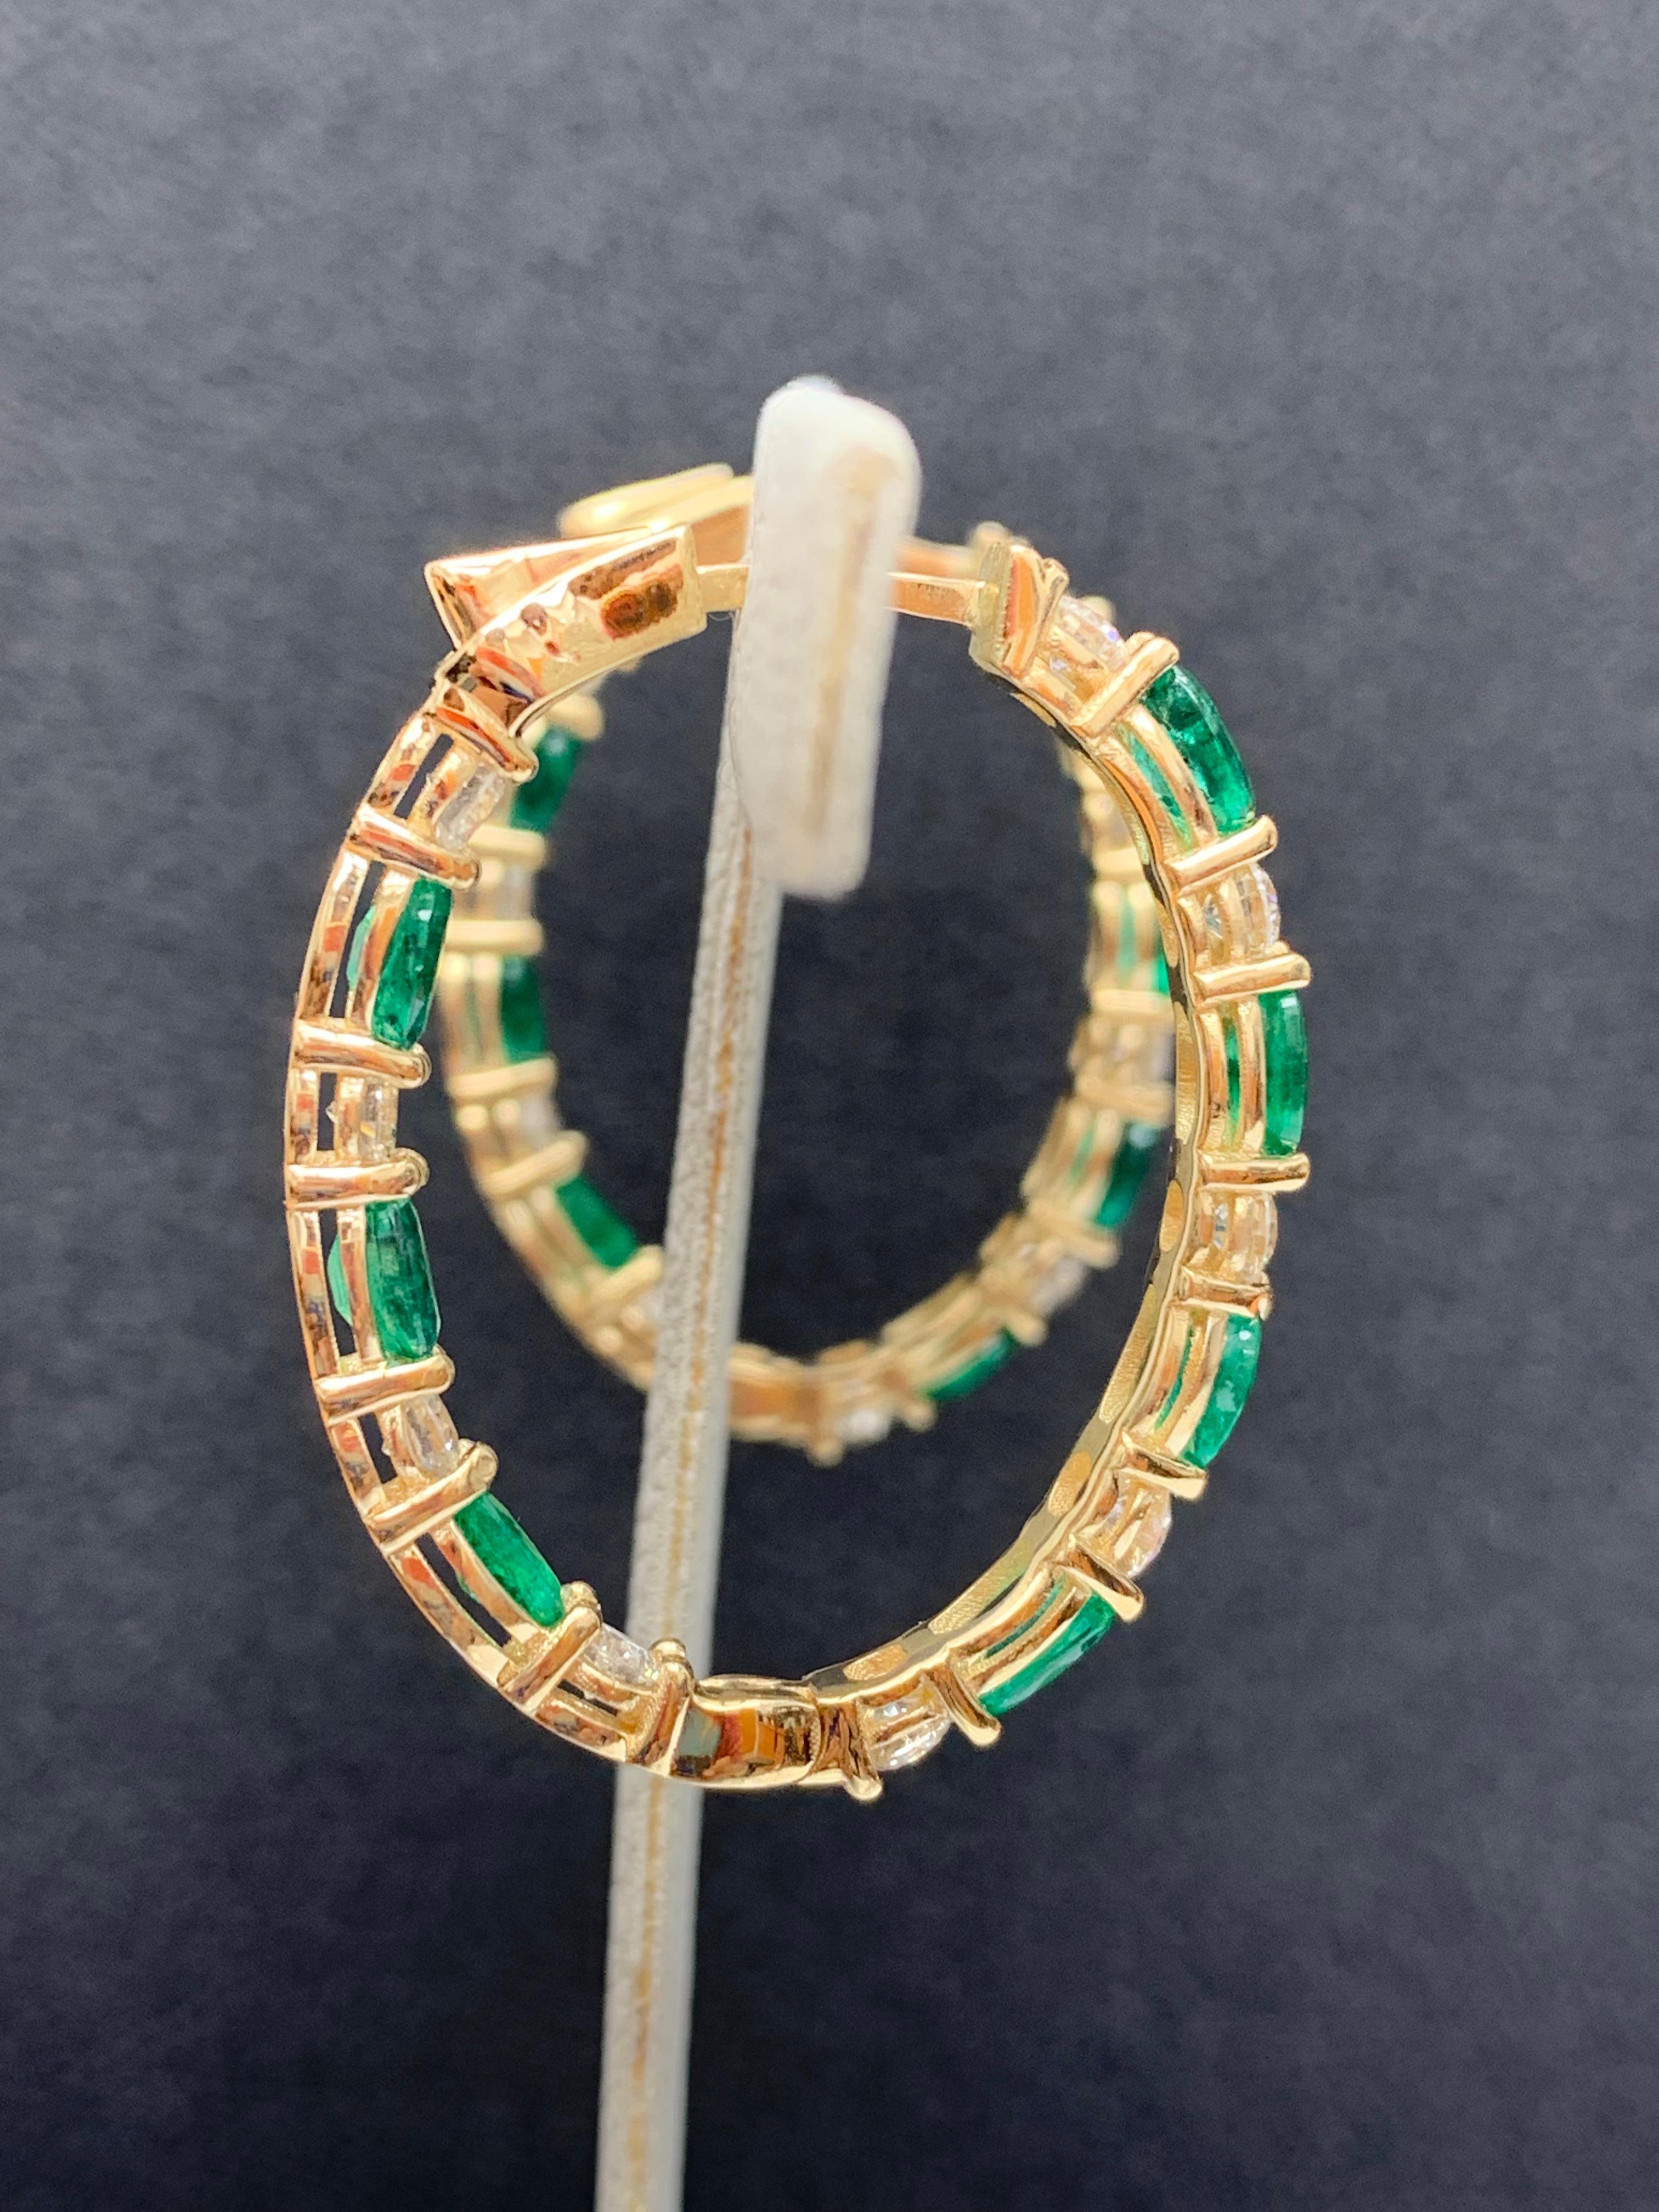 3.13 Carat Oval Cut Emerald and Diamond Hoop Earrings in 14K Yellow Gold For Sale 7